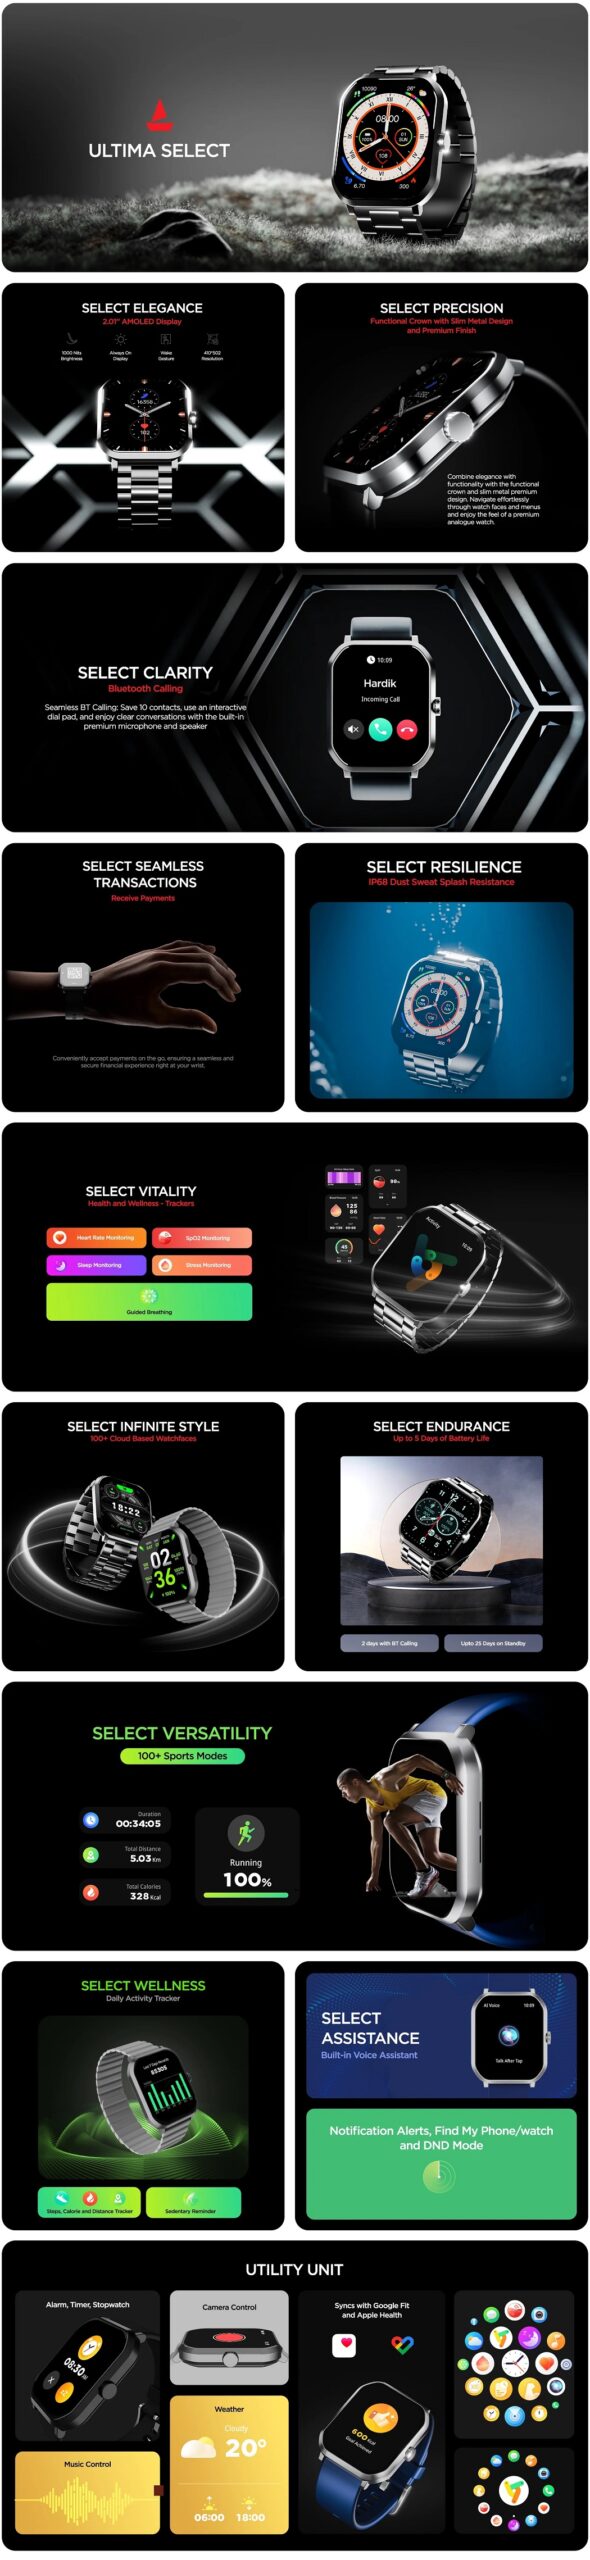 boAt Ultima Select Smart Watch with 2.01 AMOLED Display Newly Launched Active Black